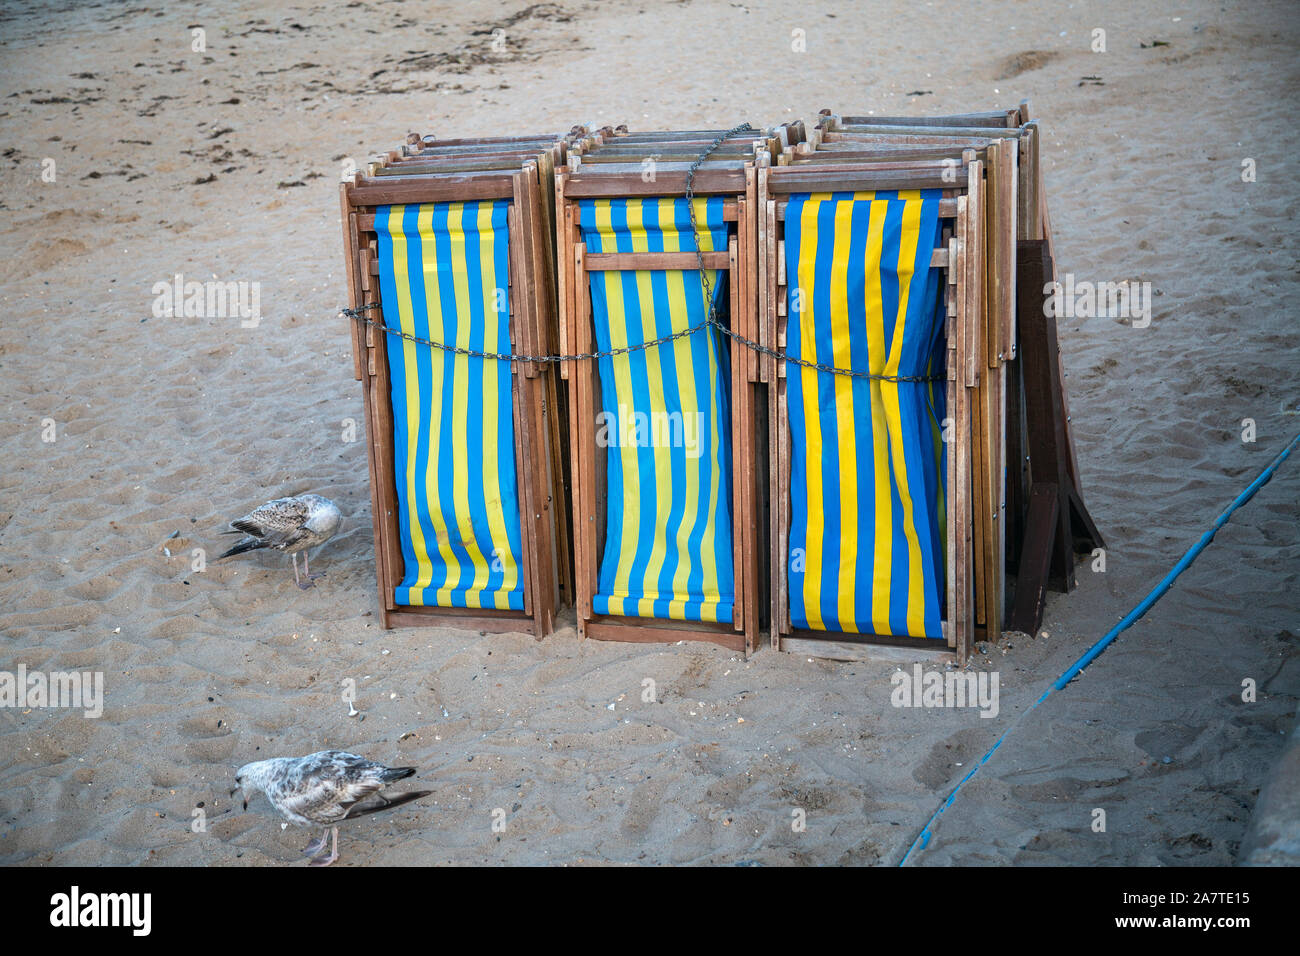 Secured Deckchairs Stock Photo